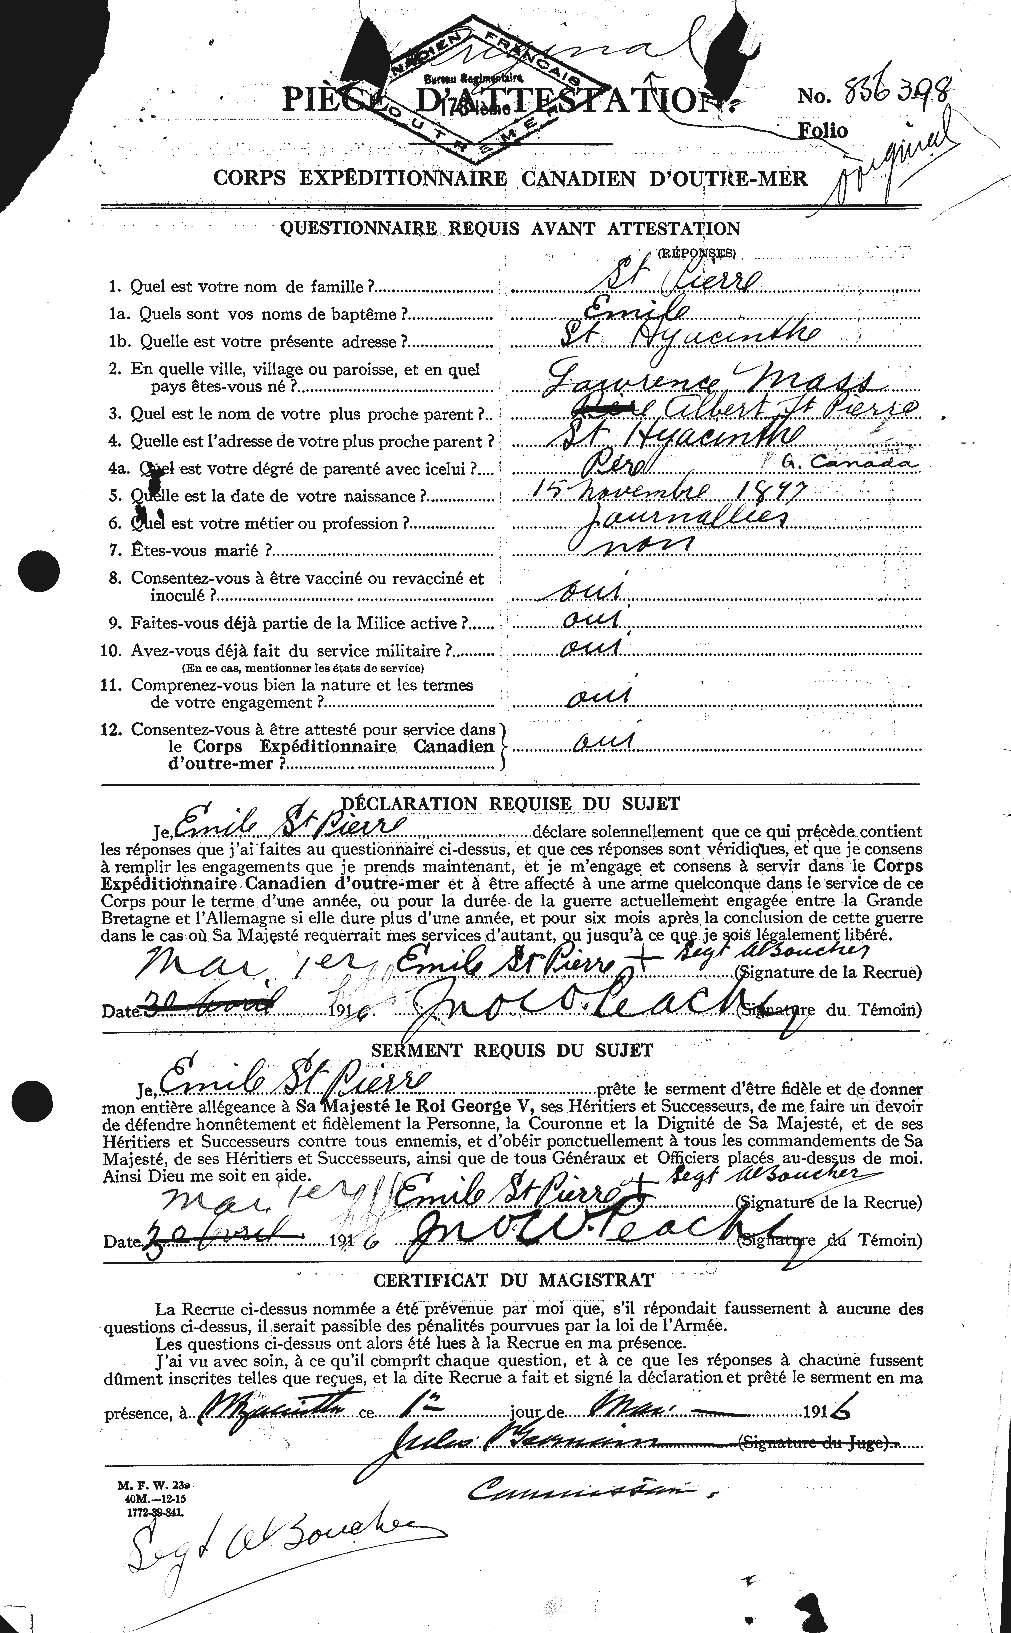 Personnel Records of the First World War - CEF 077829a